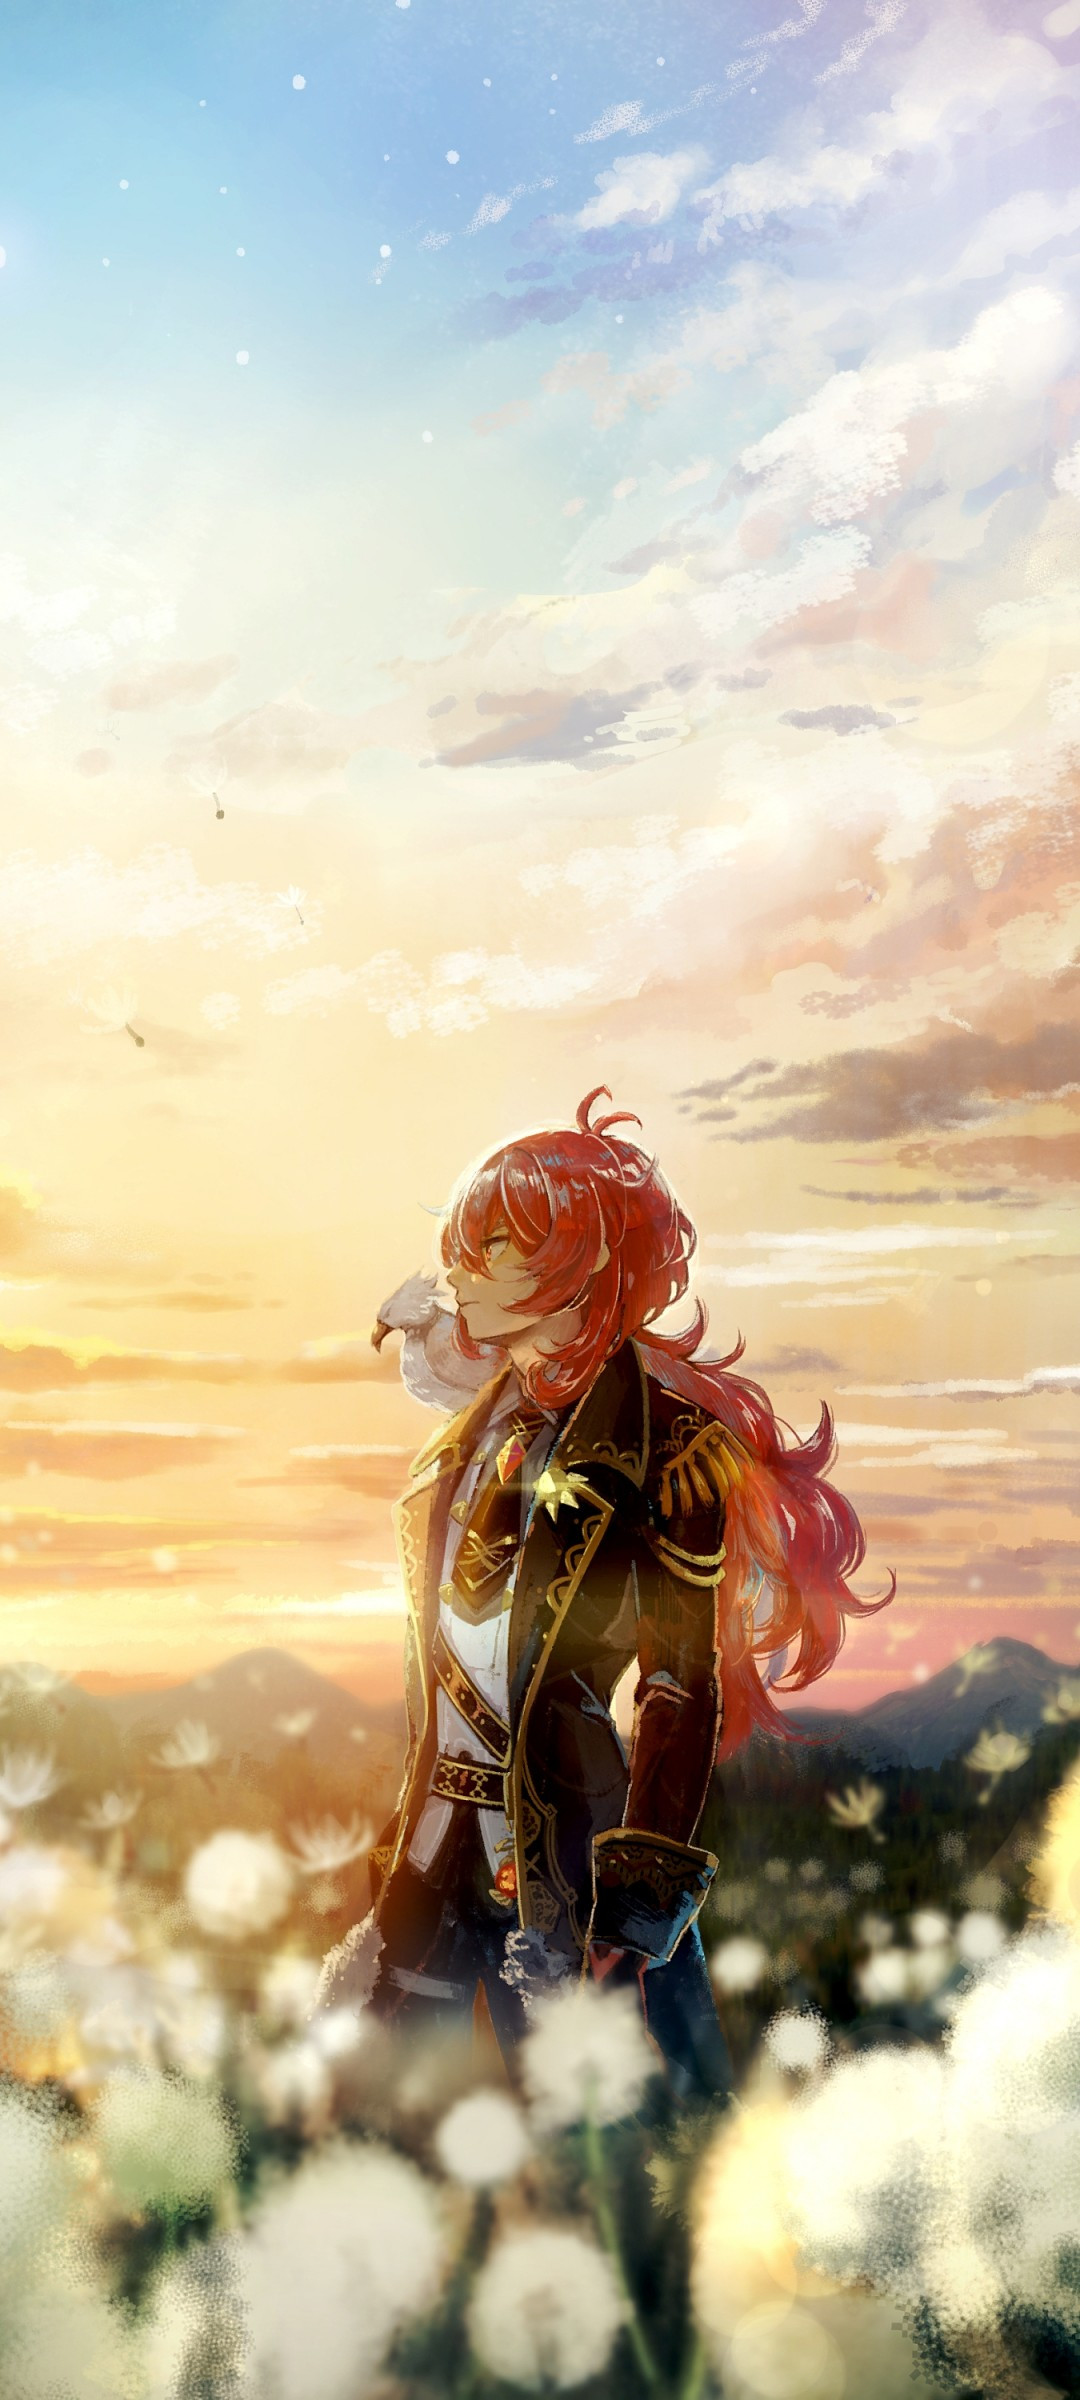 Download 1080x2400 Diluc, Genshin Impact, Anime Games, Red Hair, Anime Landscape, Clouds Wallpaper for Samsung Galaxy Note 20 & S20 FE, Xiaomi Mi 10T Pro, Poco F2 Pro